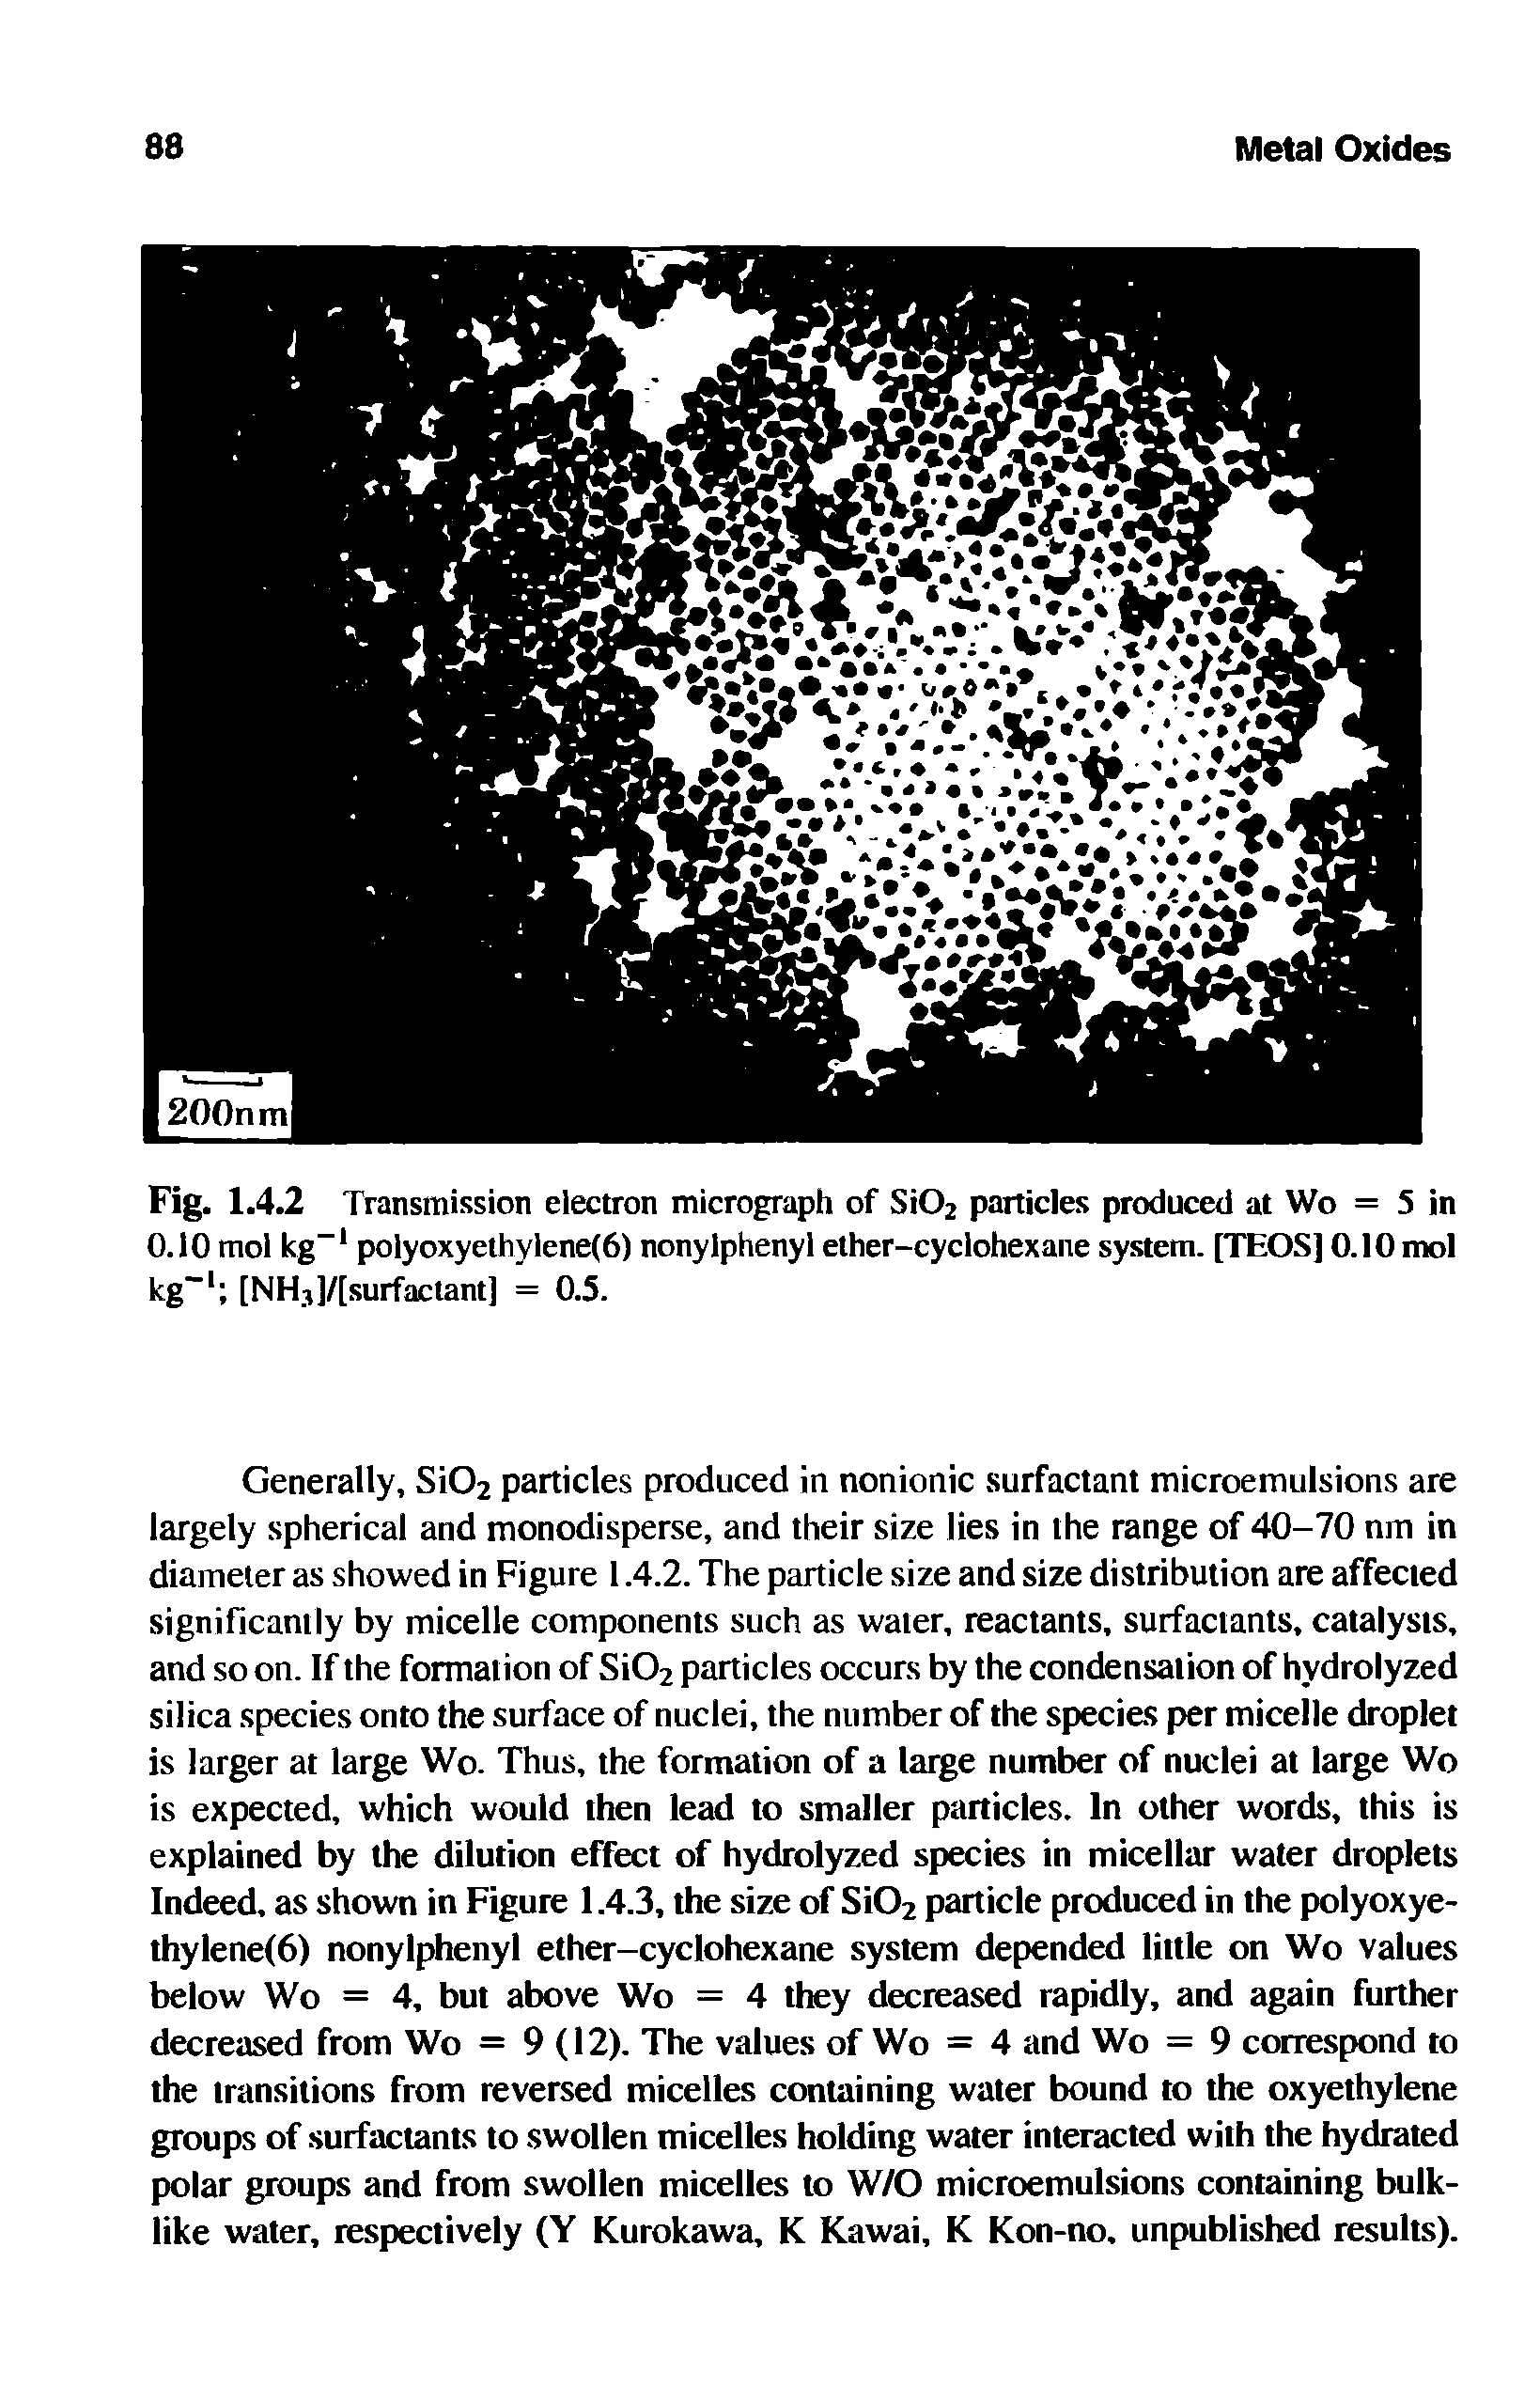 Fig. 1.4.2 Transmission electron micrograph of Si02 particles produced at Wo = 5 in 0.10 mol kg-1 polyoxyethylene(6) nonylphenyl ether-cyclohexane system. [TEOS] 0.10 mol kg-1 [NH3]/[surfactant] = 0.5.